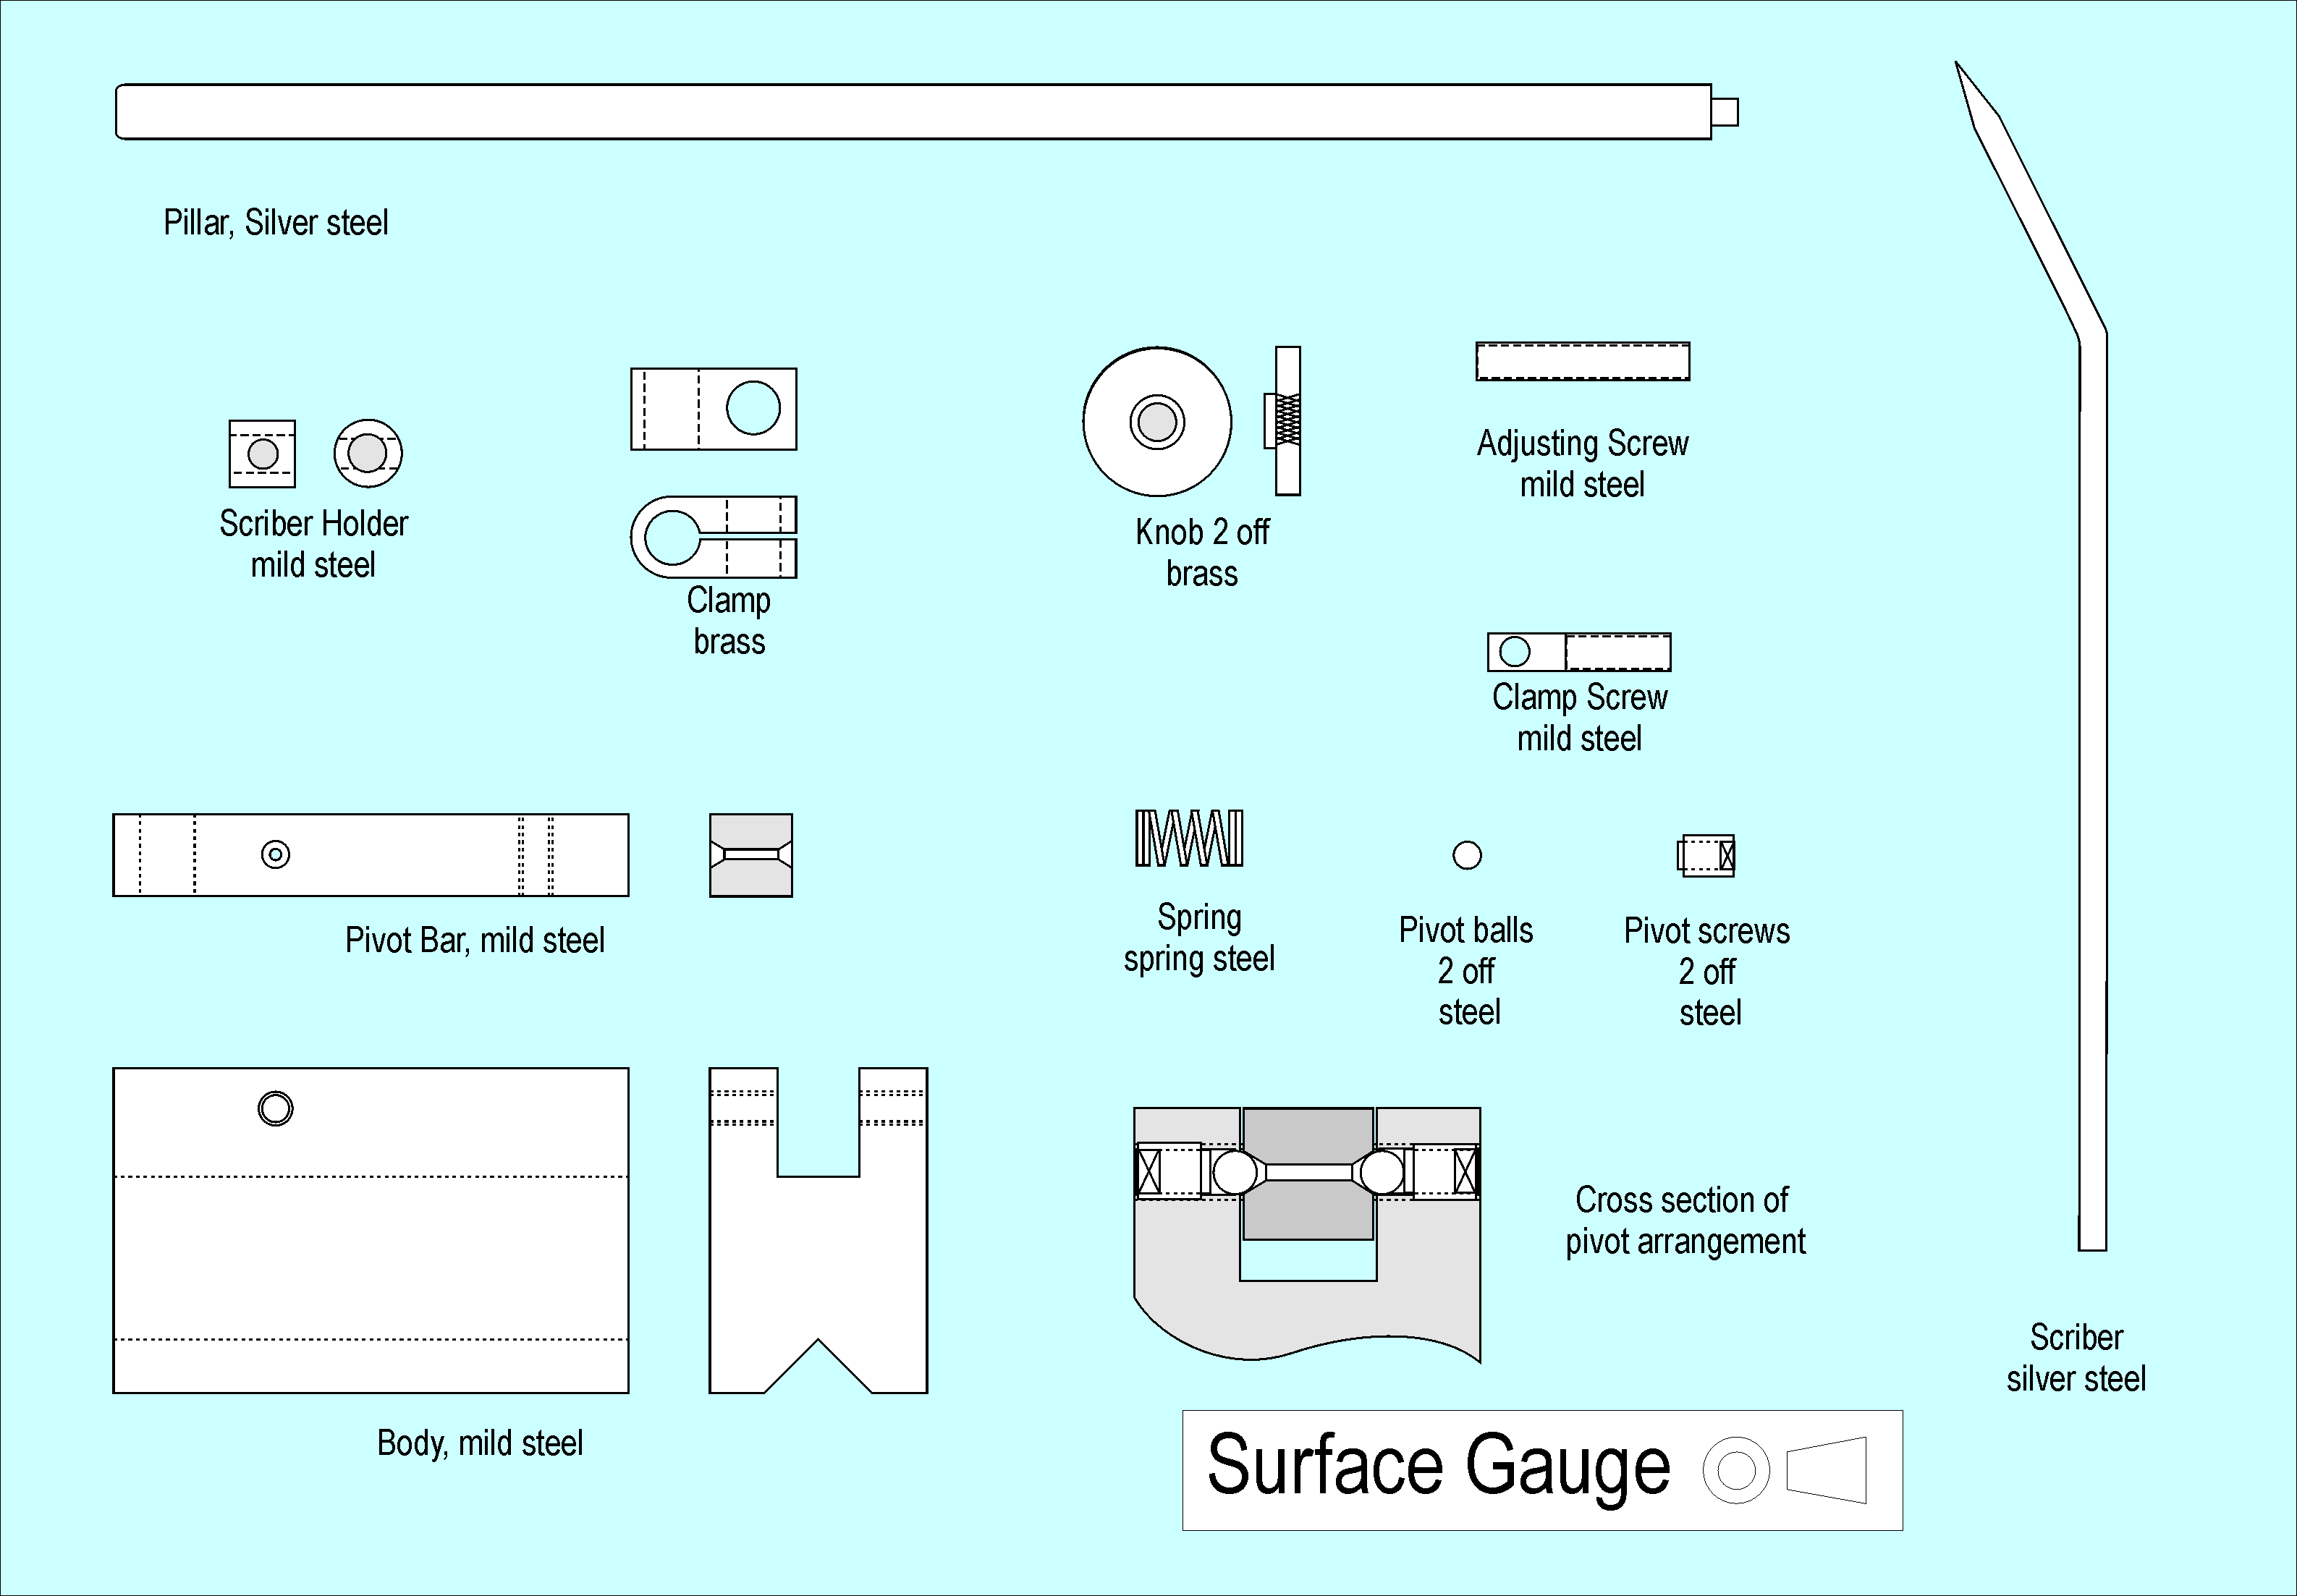 Plan for the Surface Gauge